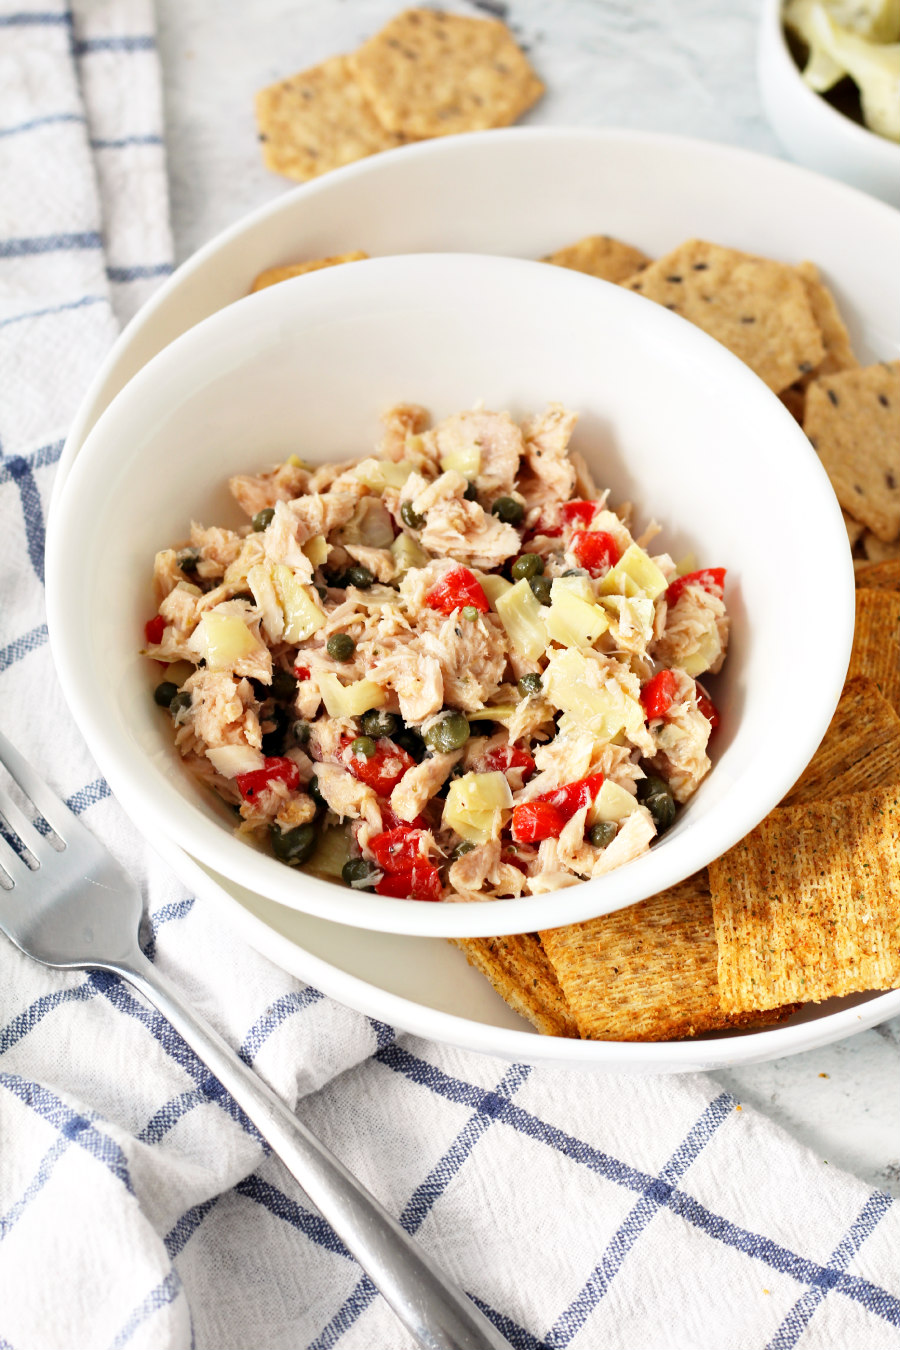 Mediterranean Tuna Salad in a bowl next to Crunchmaster and Triscuit crackers.